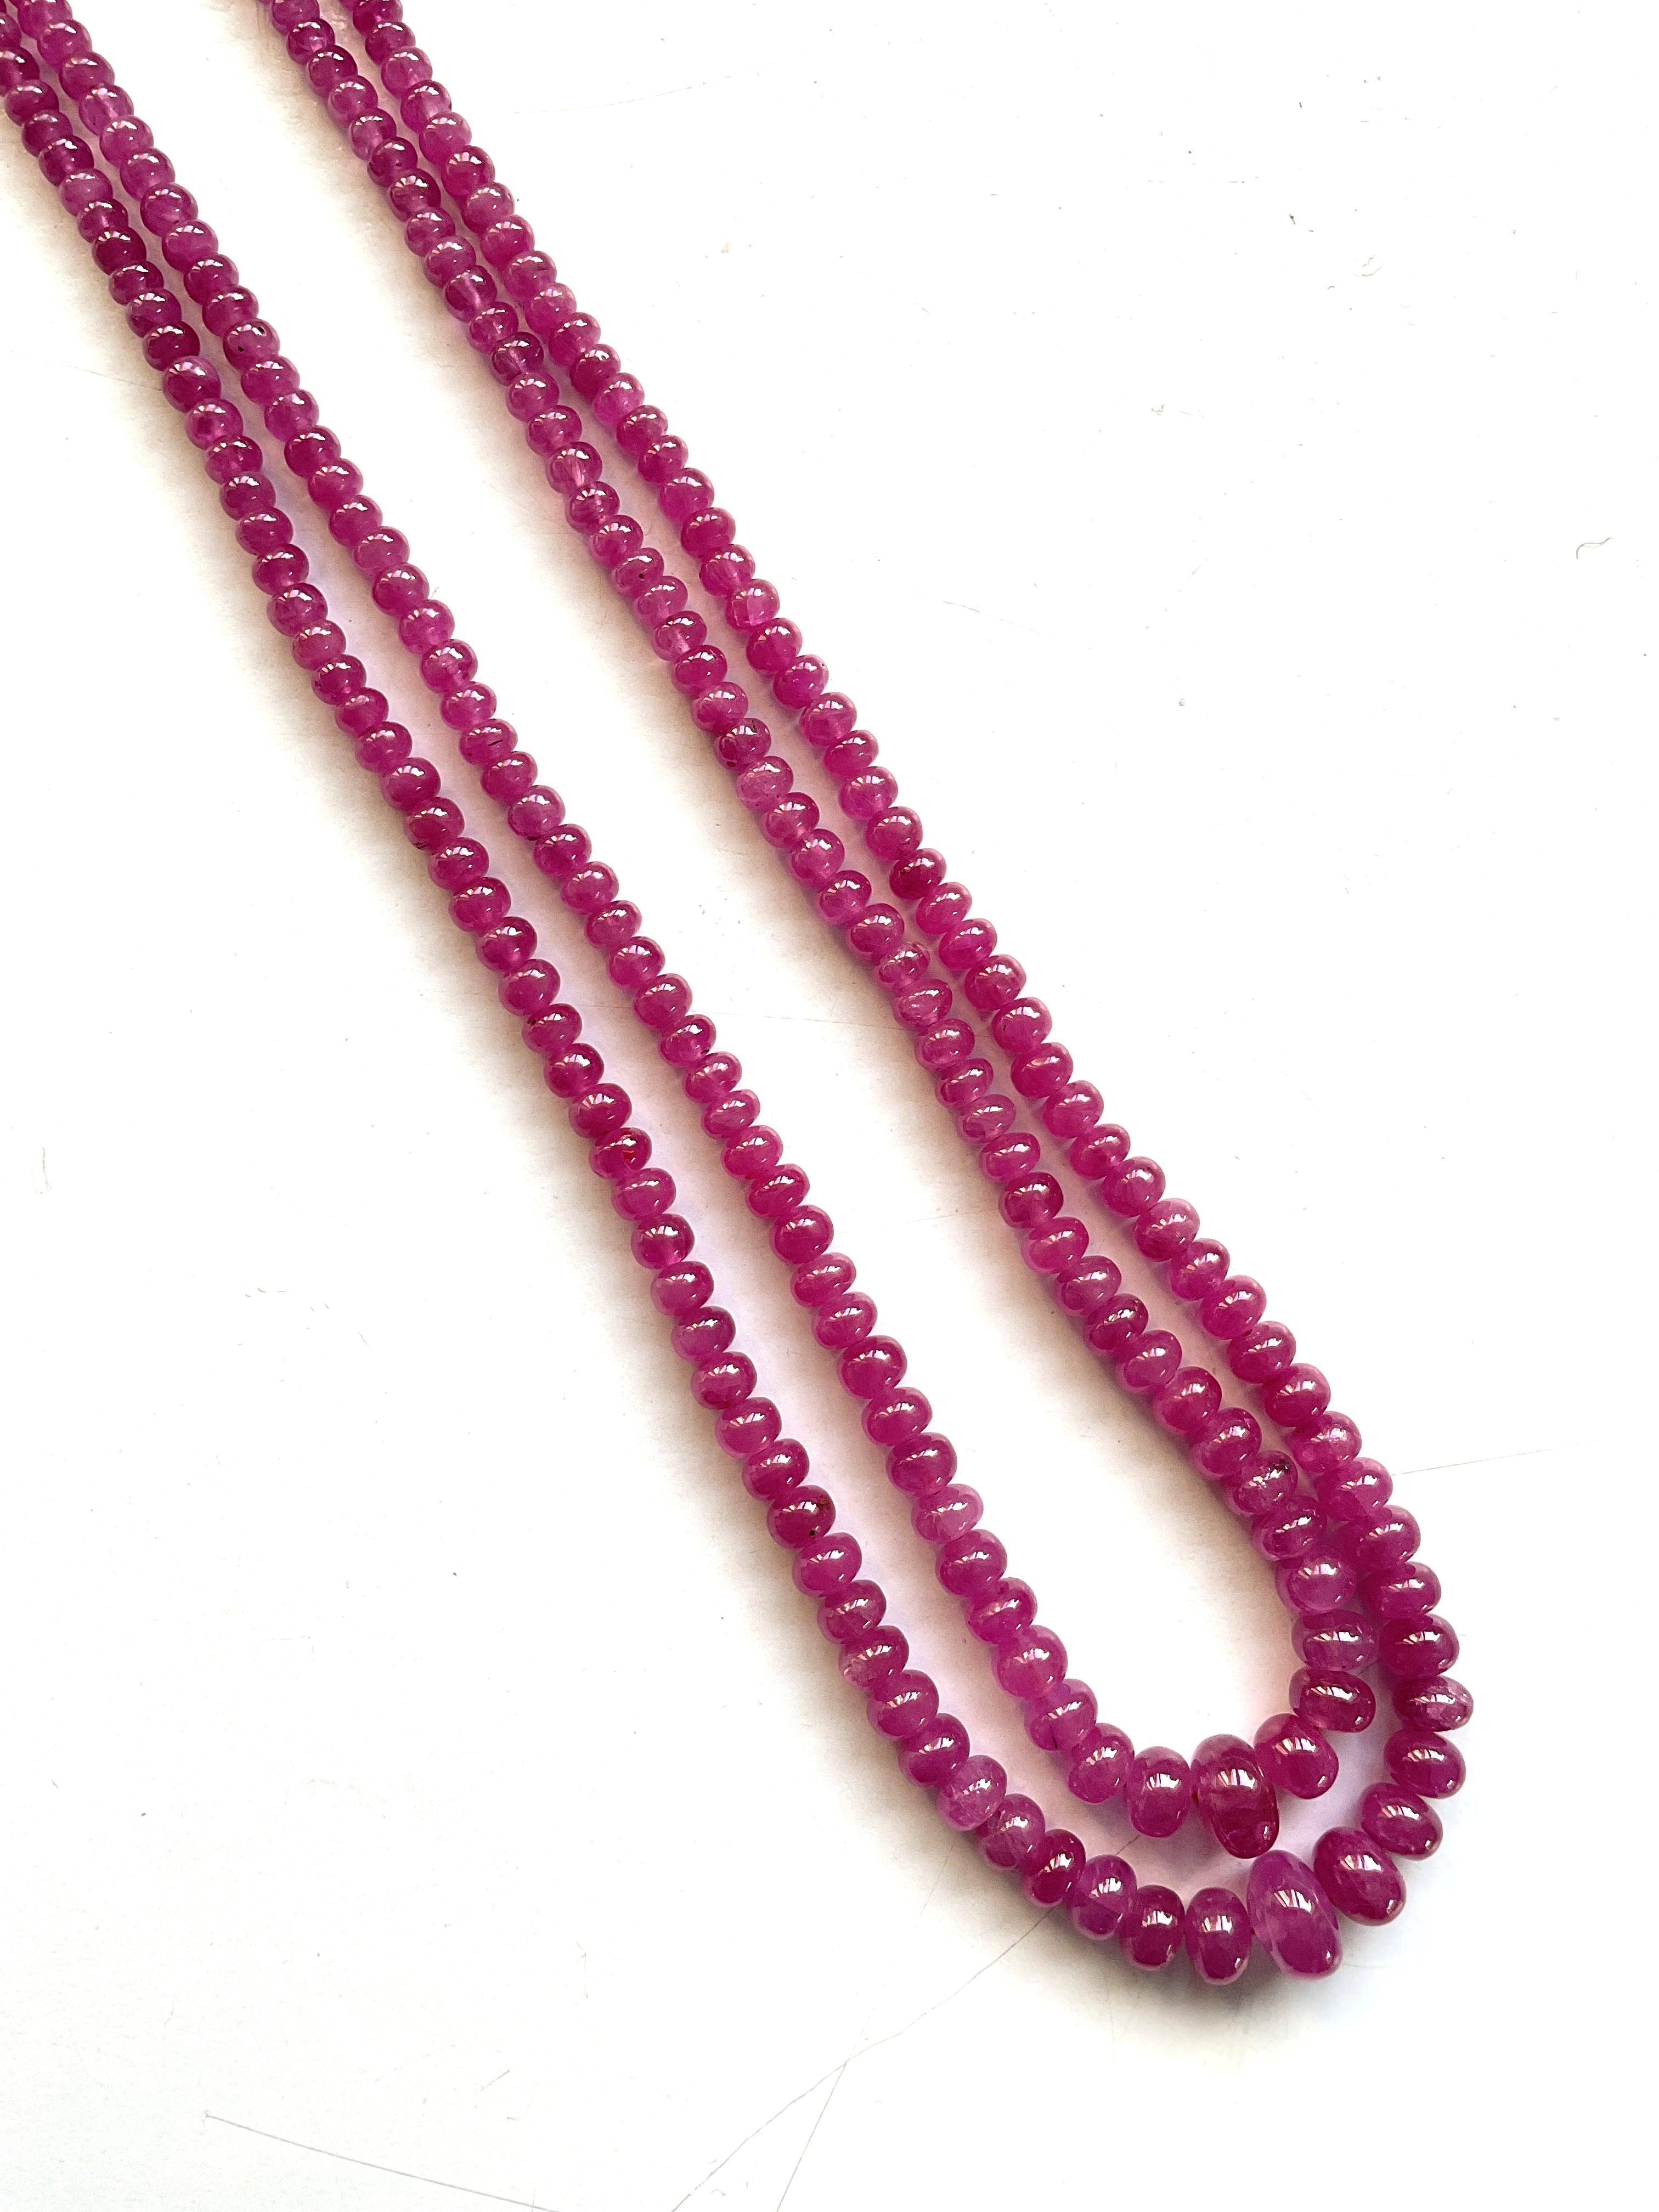 179.32 Carats Burma Ruby Plain Beaded Necklace Top Quality Natural Gemstone

Gemstone - Ruby
Weight - 179.32 carats
Shape - Beads
Size - 3 To 8 MM
Quantity -  2 Line 